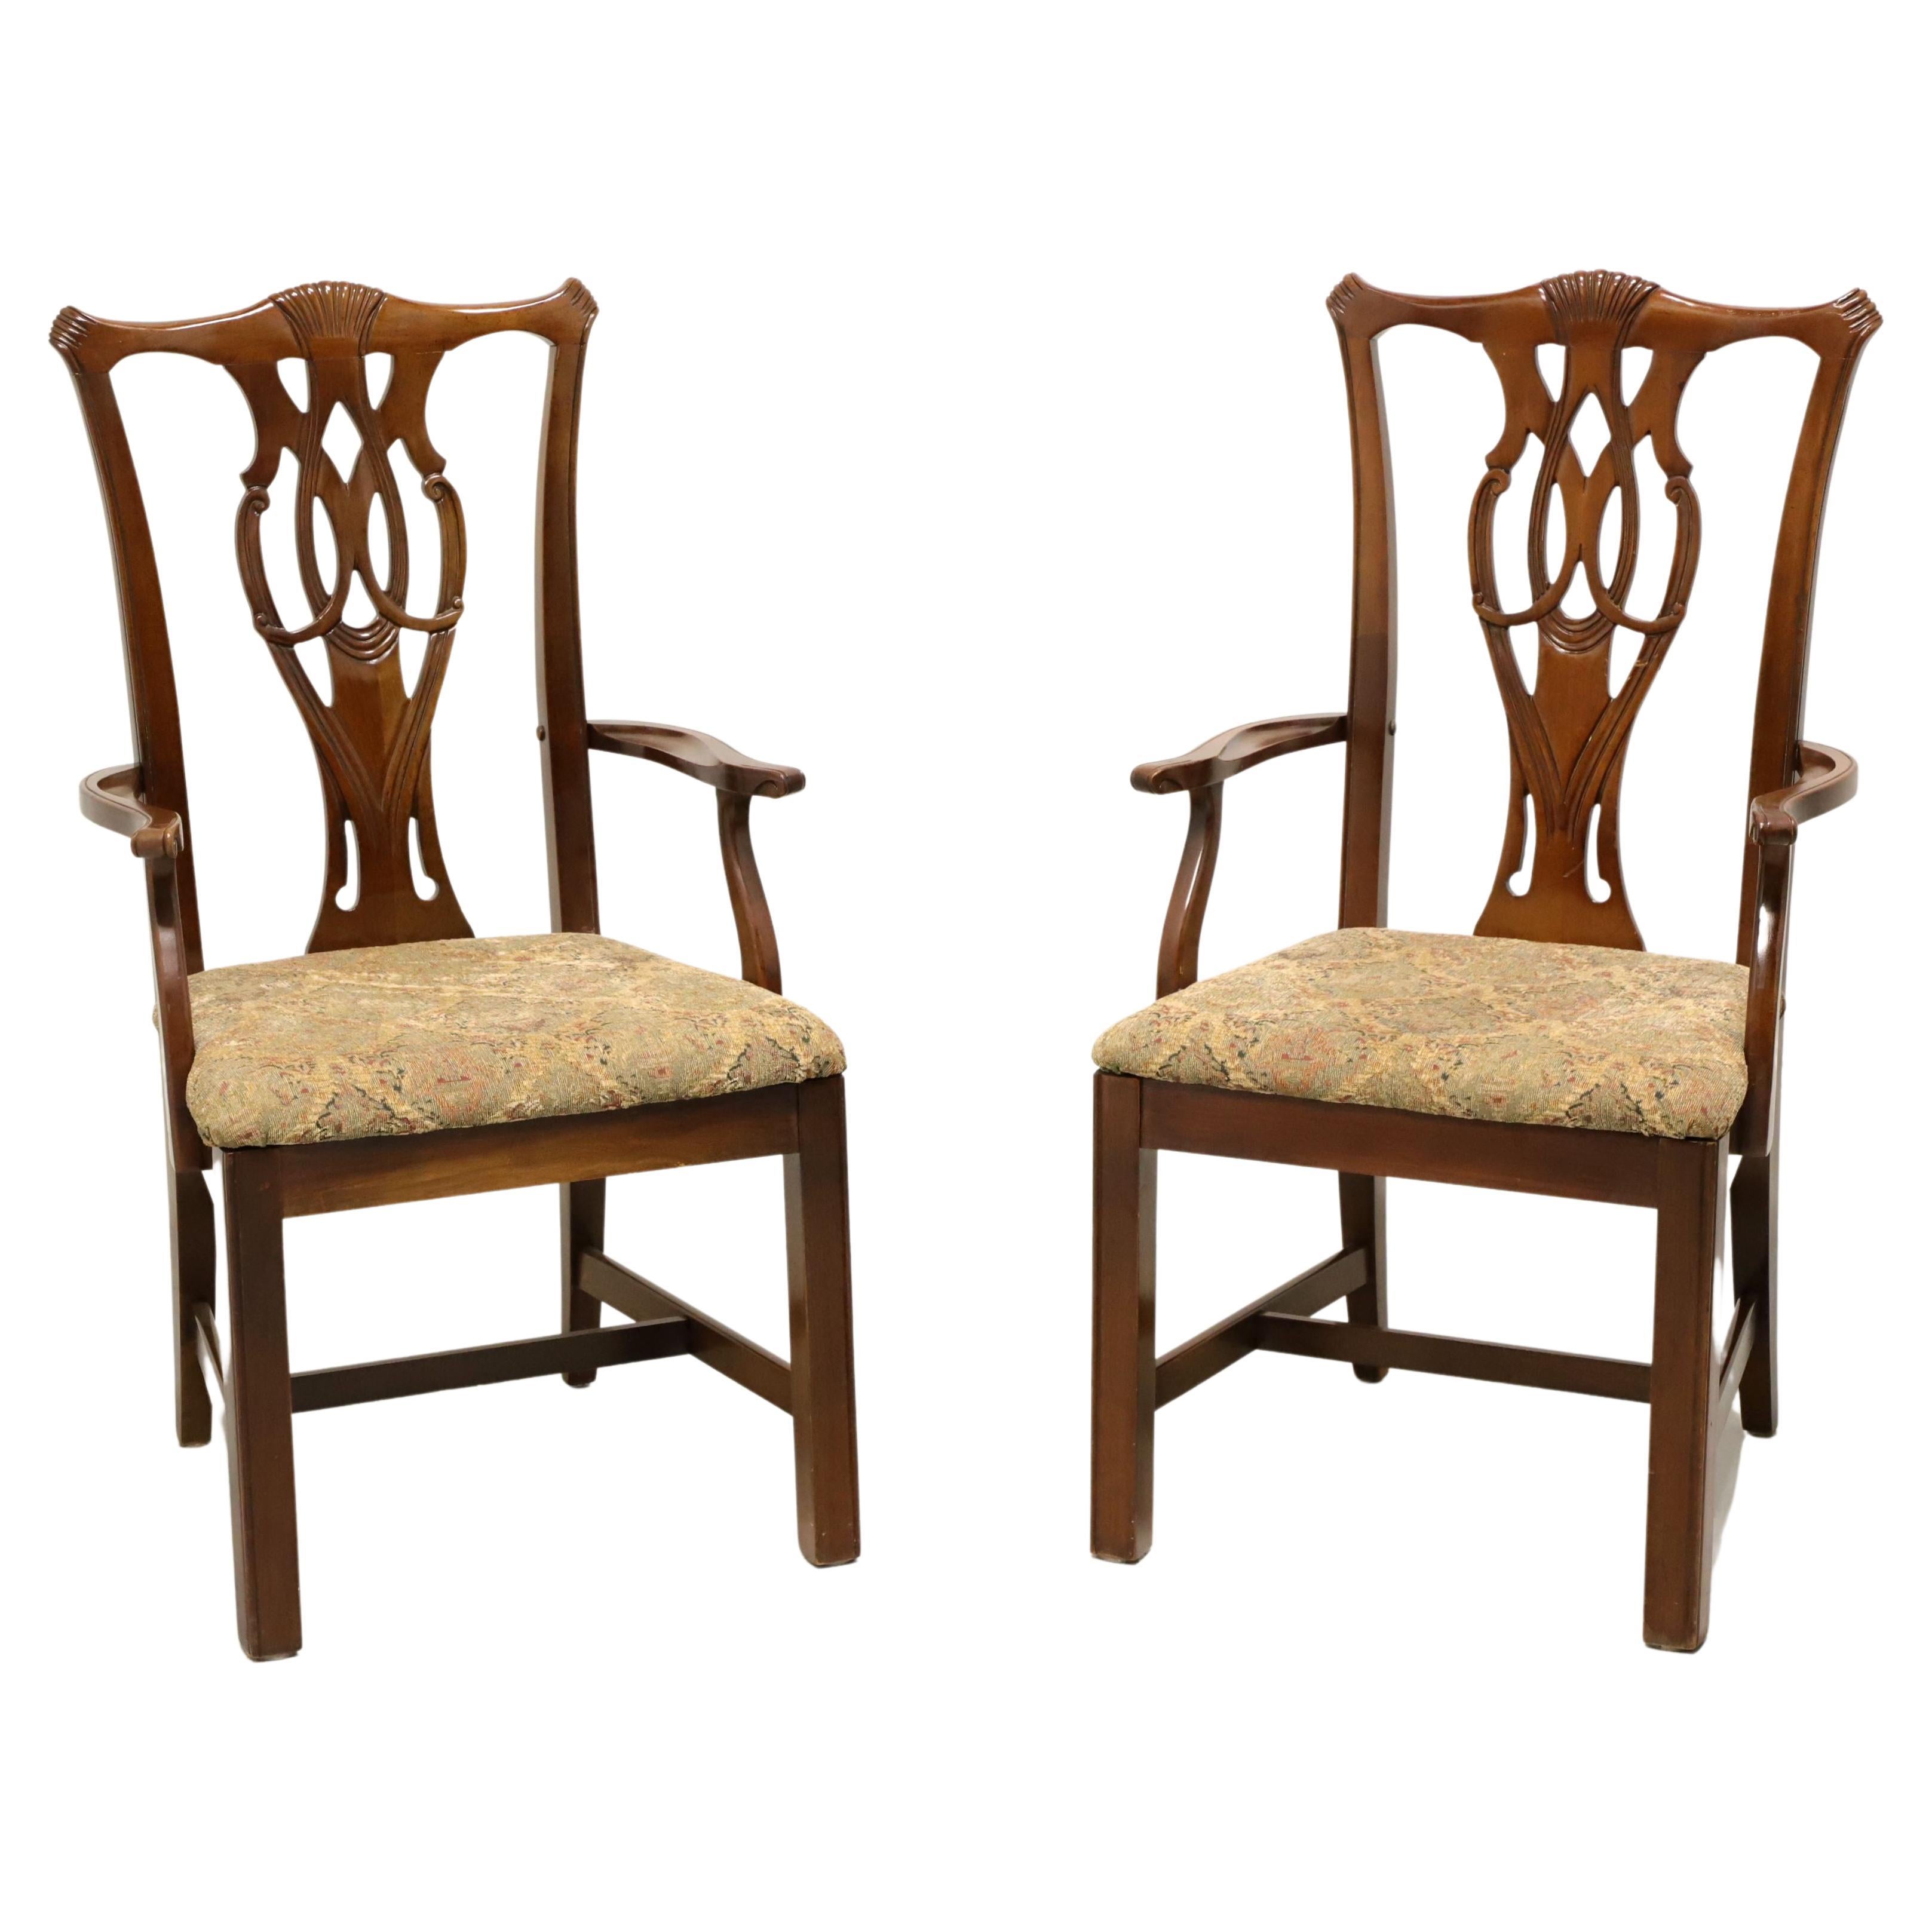 THOMASVILLE Solid Cherry Chippendale Straight Leg Dining Armchairs - Pair For Sale